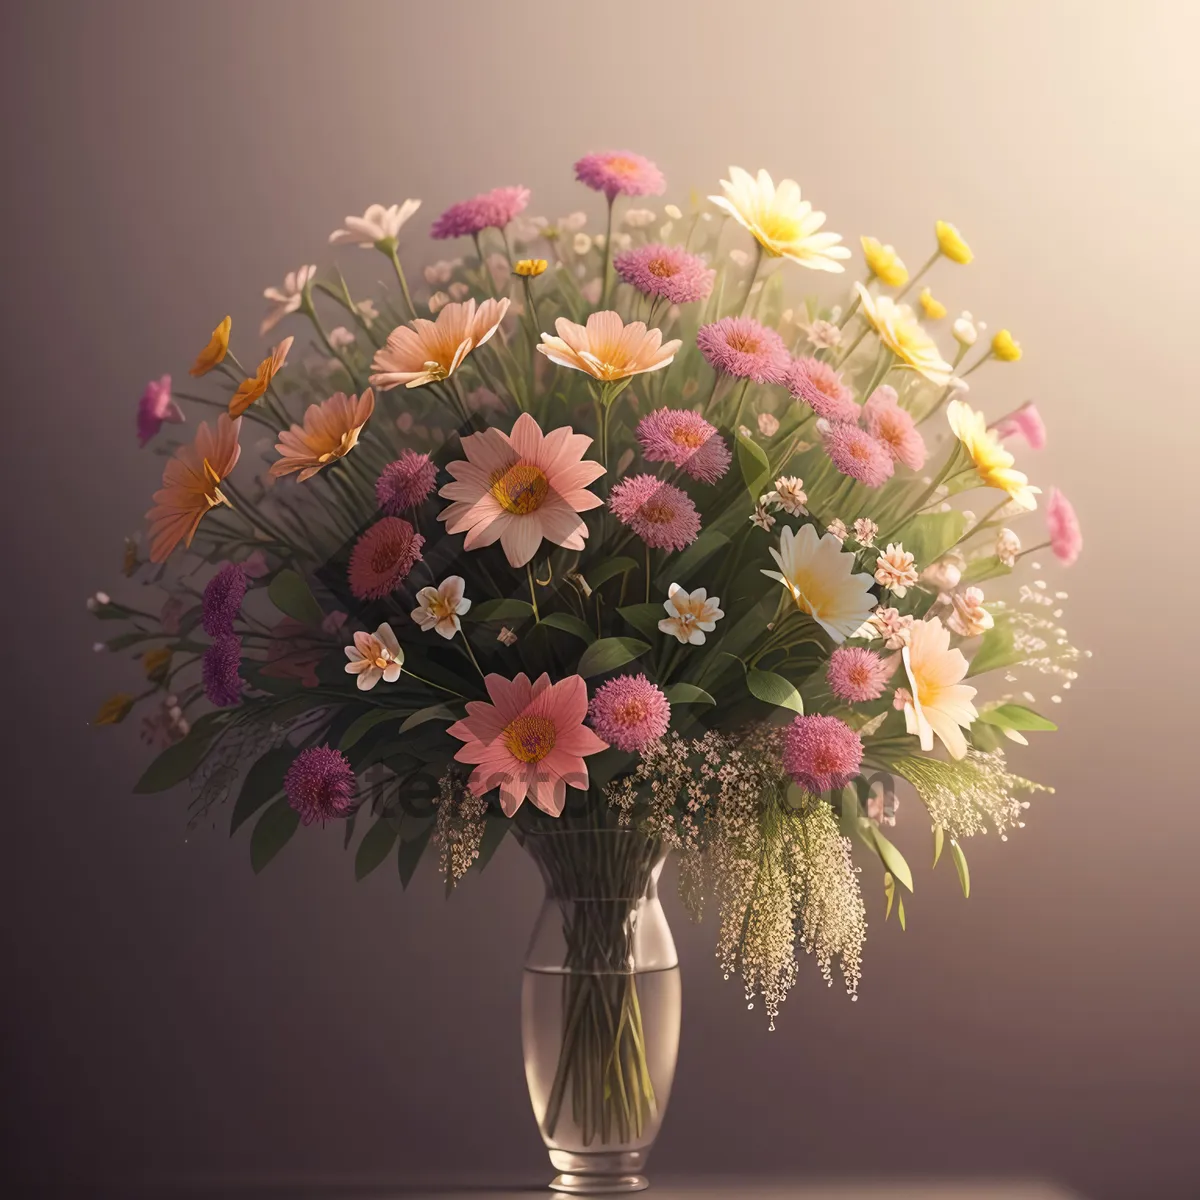 Picture of Pink Floral Bouquet Design with Daisy Blossoms